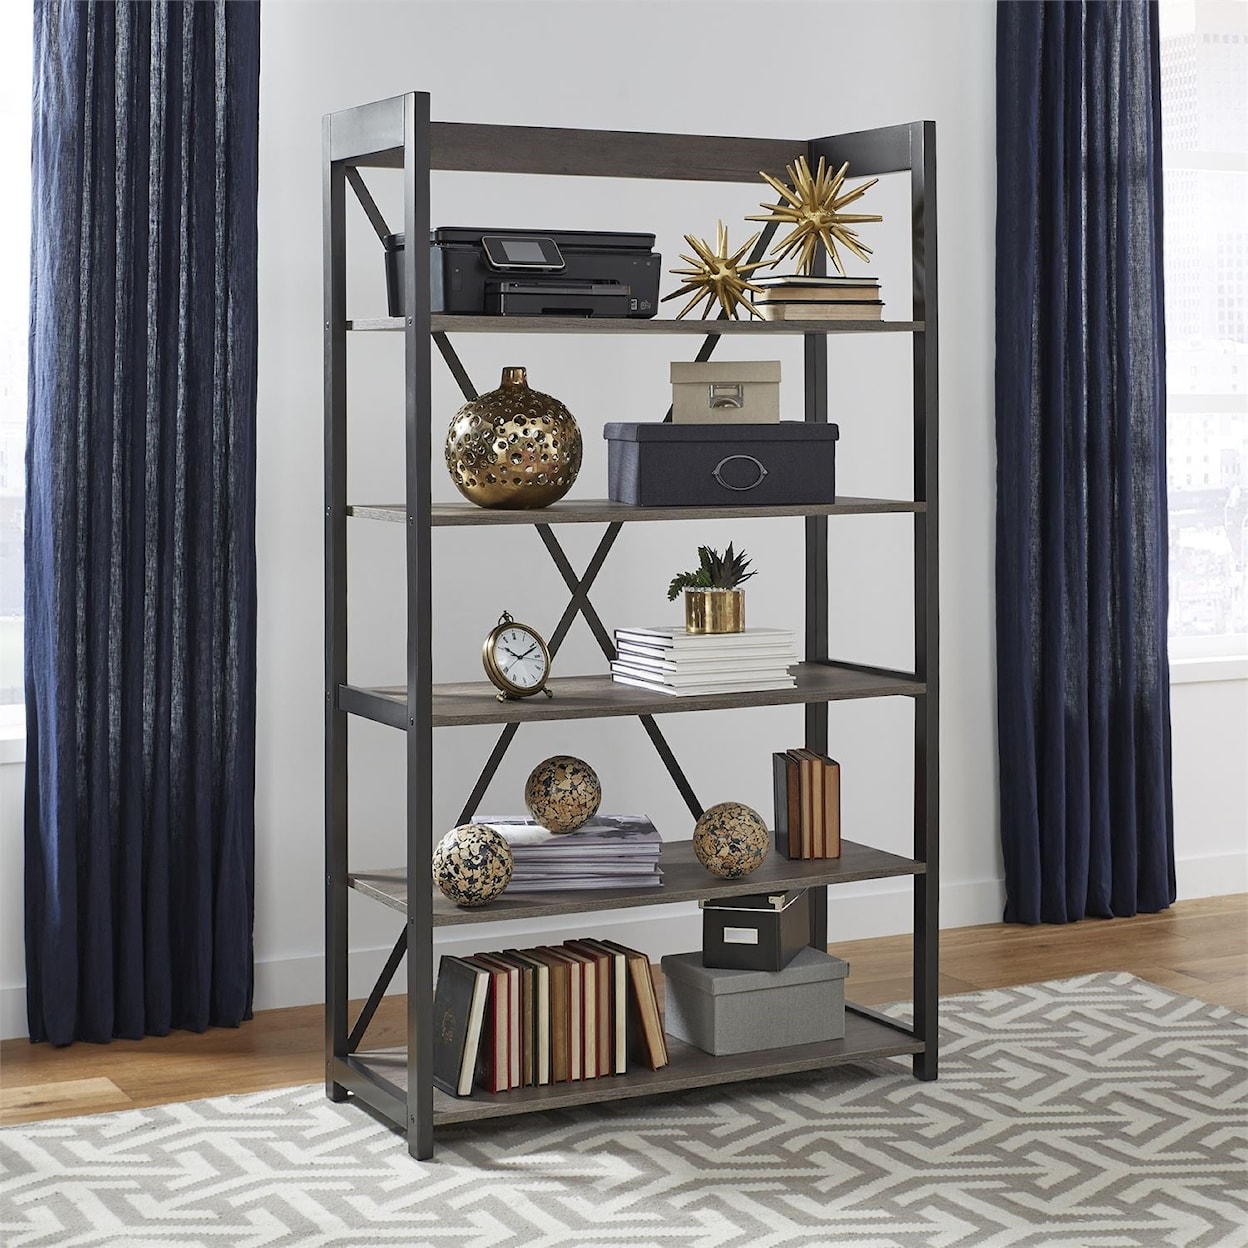 Libby Tanners Creek Bookcase